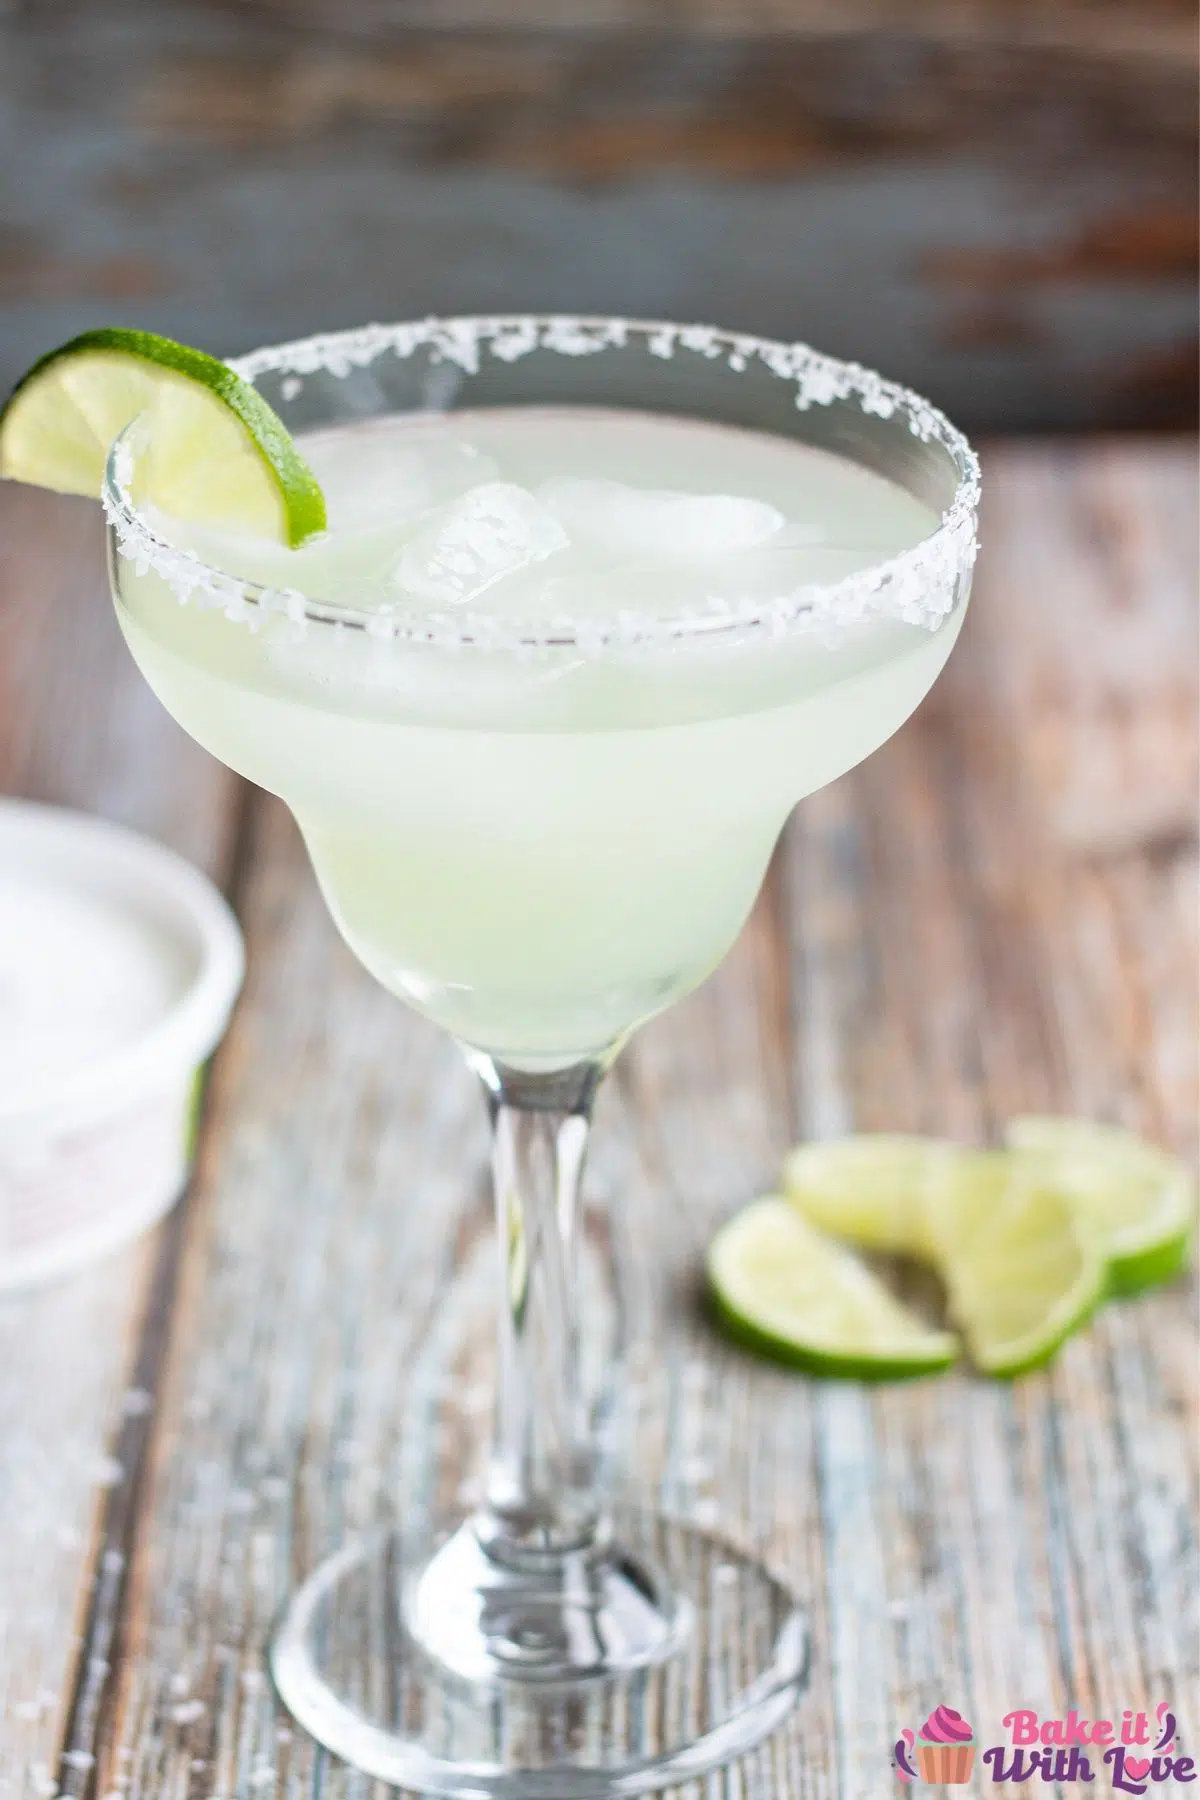 Tall image of the vodka margarita garnished with lime.